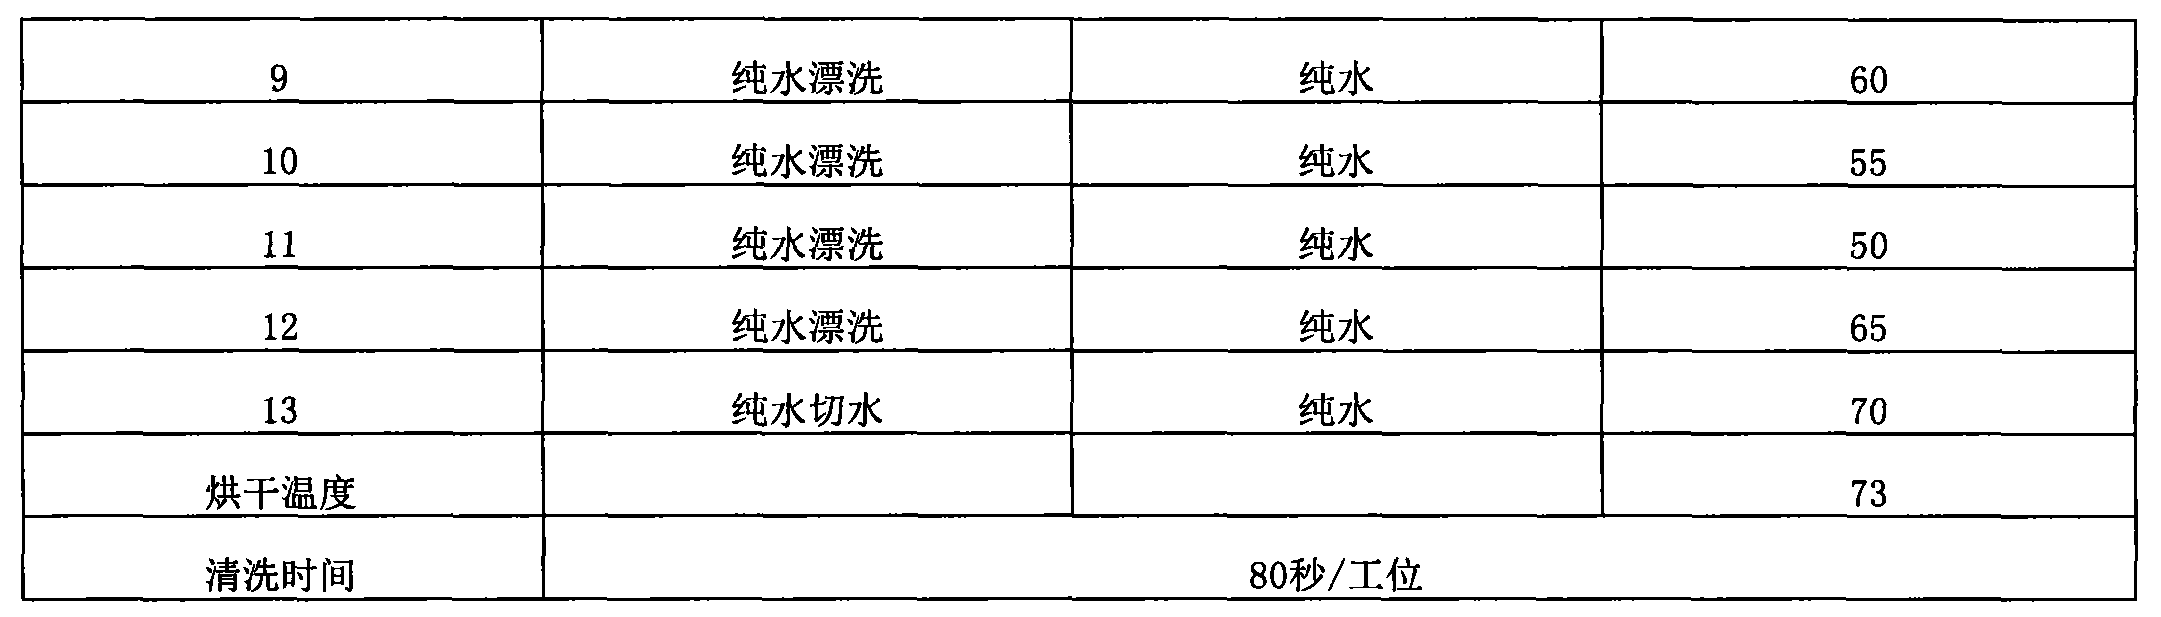 Anti-blue-ray resin lens with refraction index of 1.56 and preparation method thereof